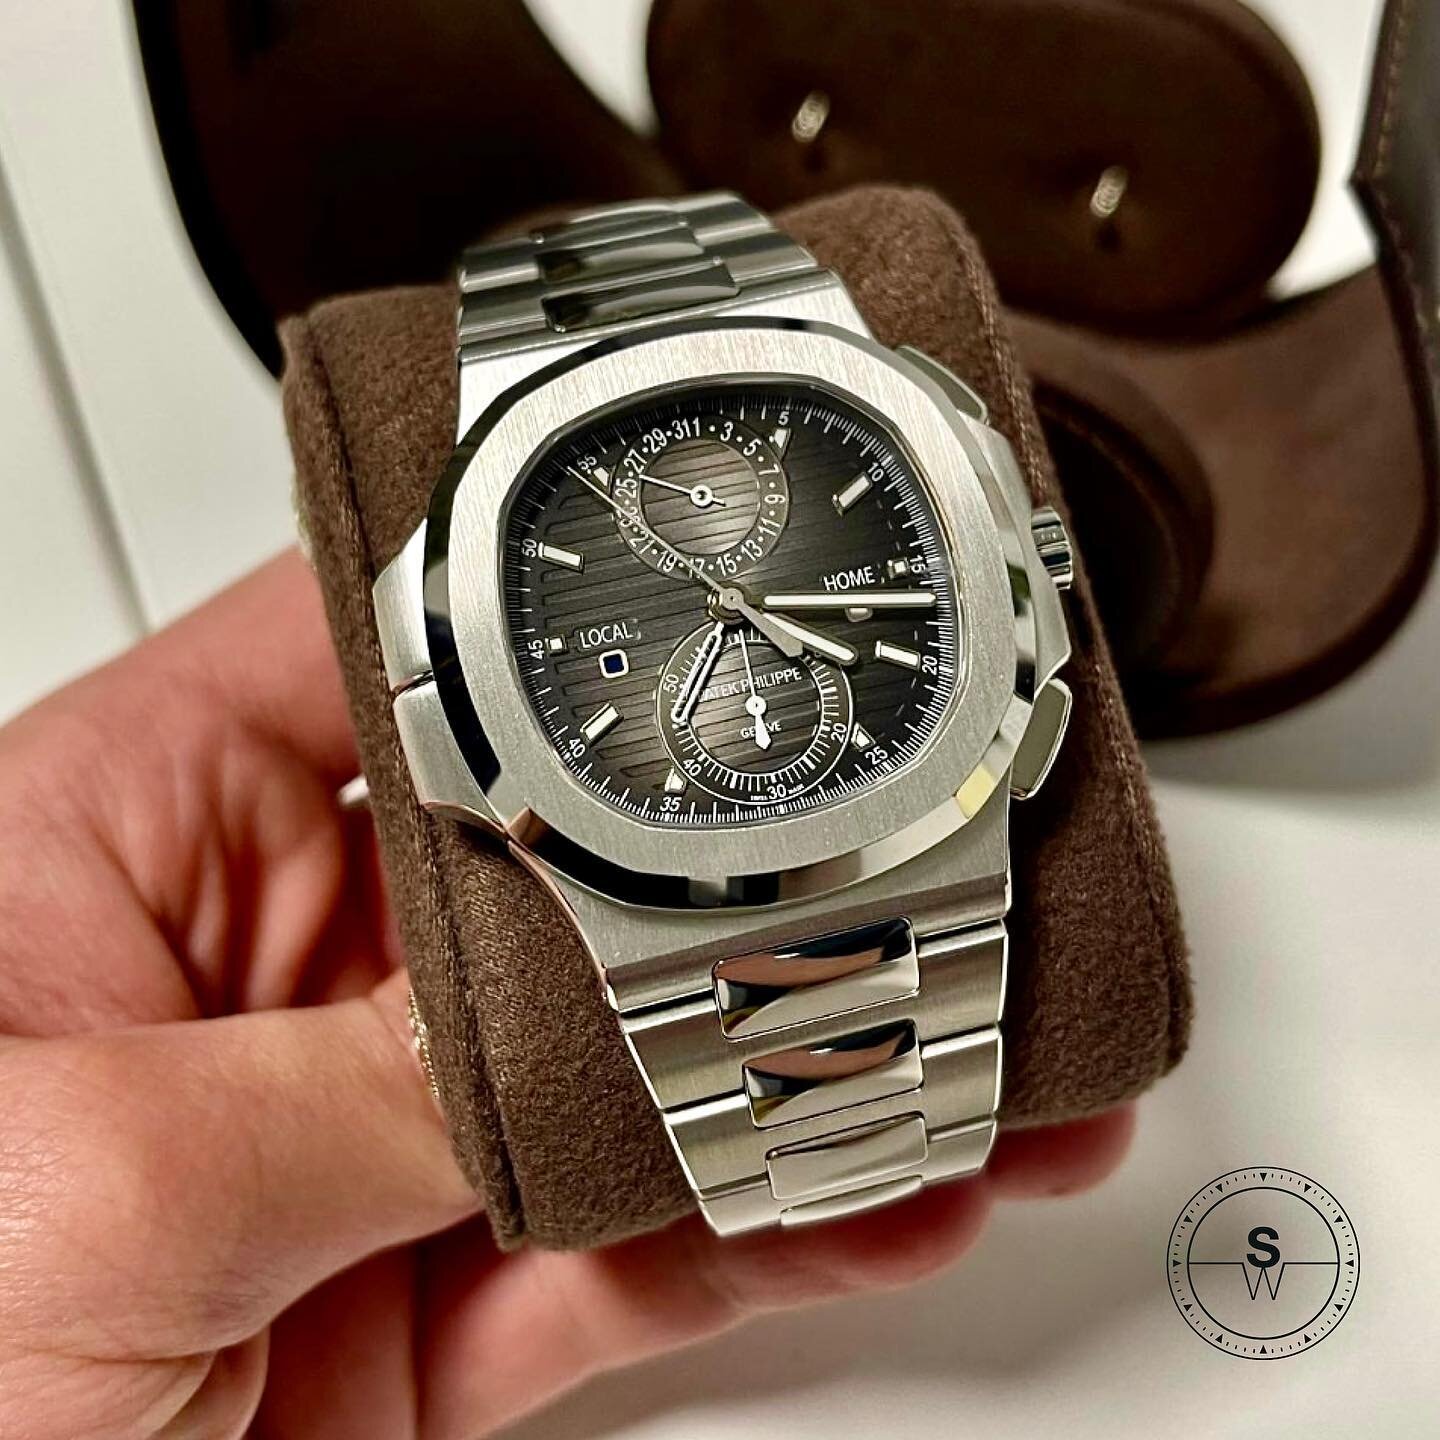 Discontinued Patek 5990/1A 🖤
Available now.

For more information please contact our team via direct message or on WhatsApp +44 (0) 758 742 2028

We are not affiliated with any of the brands we sell 🚫